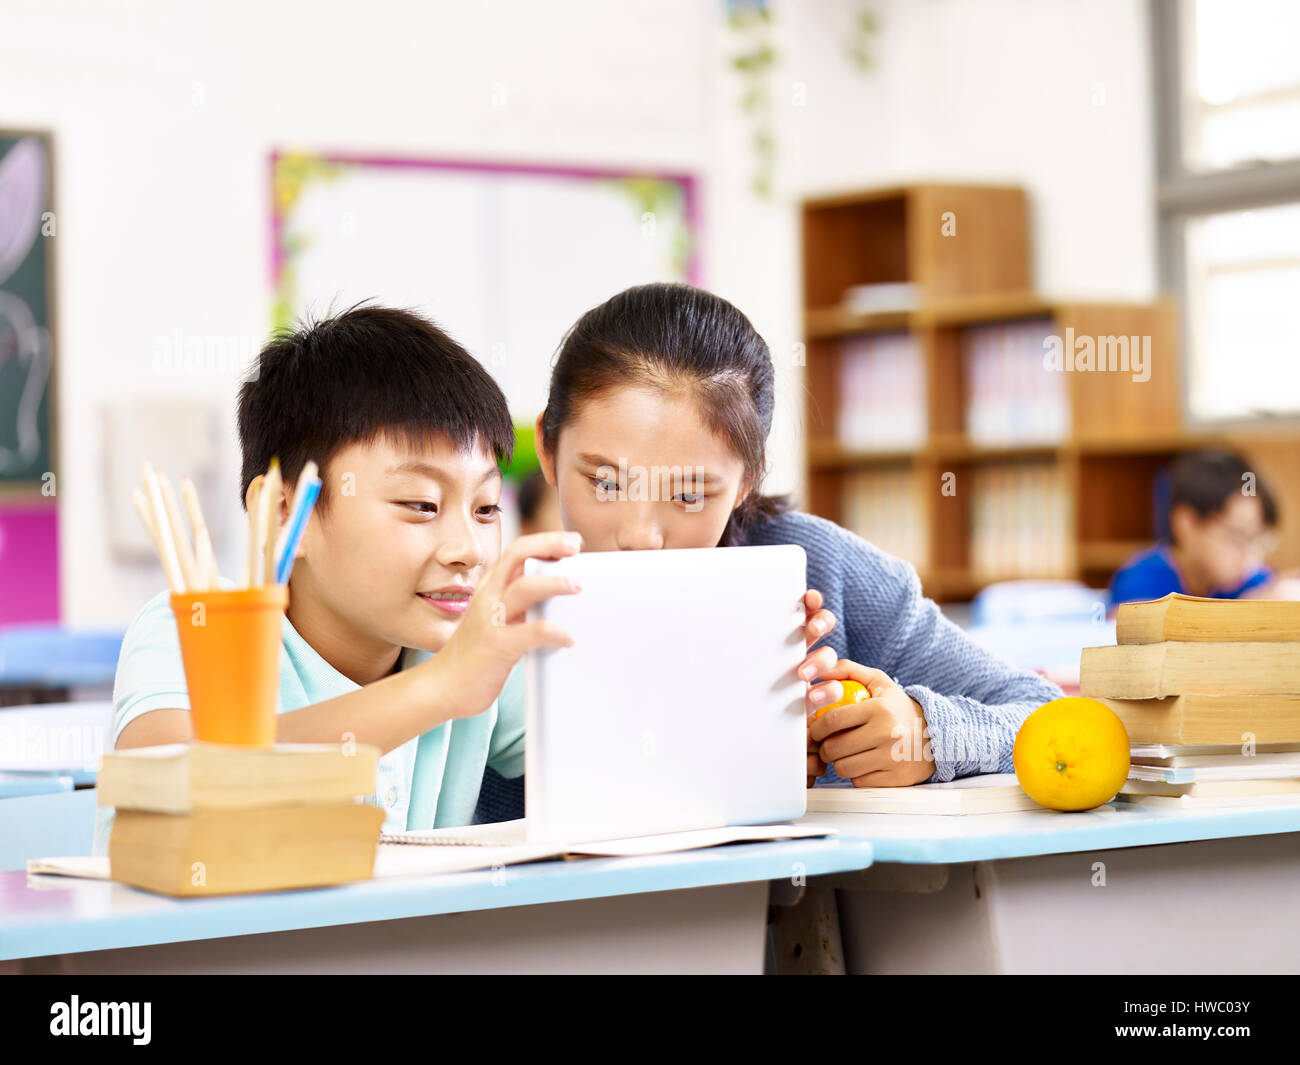 asian elementary schoolgirl and school boy using tablet computer together in classroom. Stock Photo